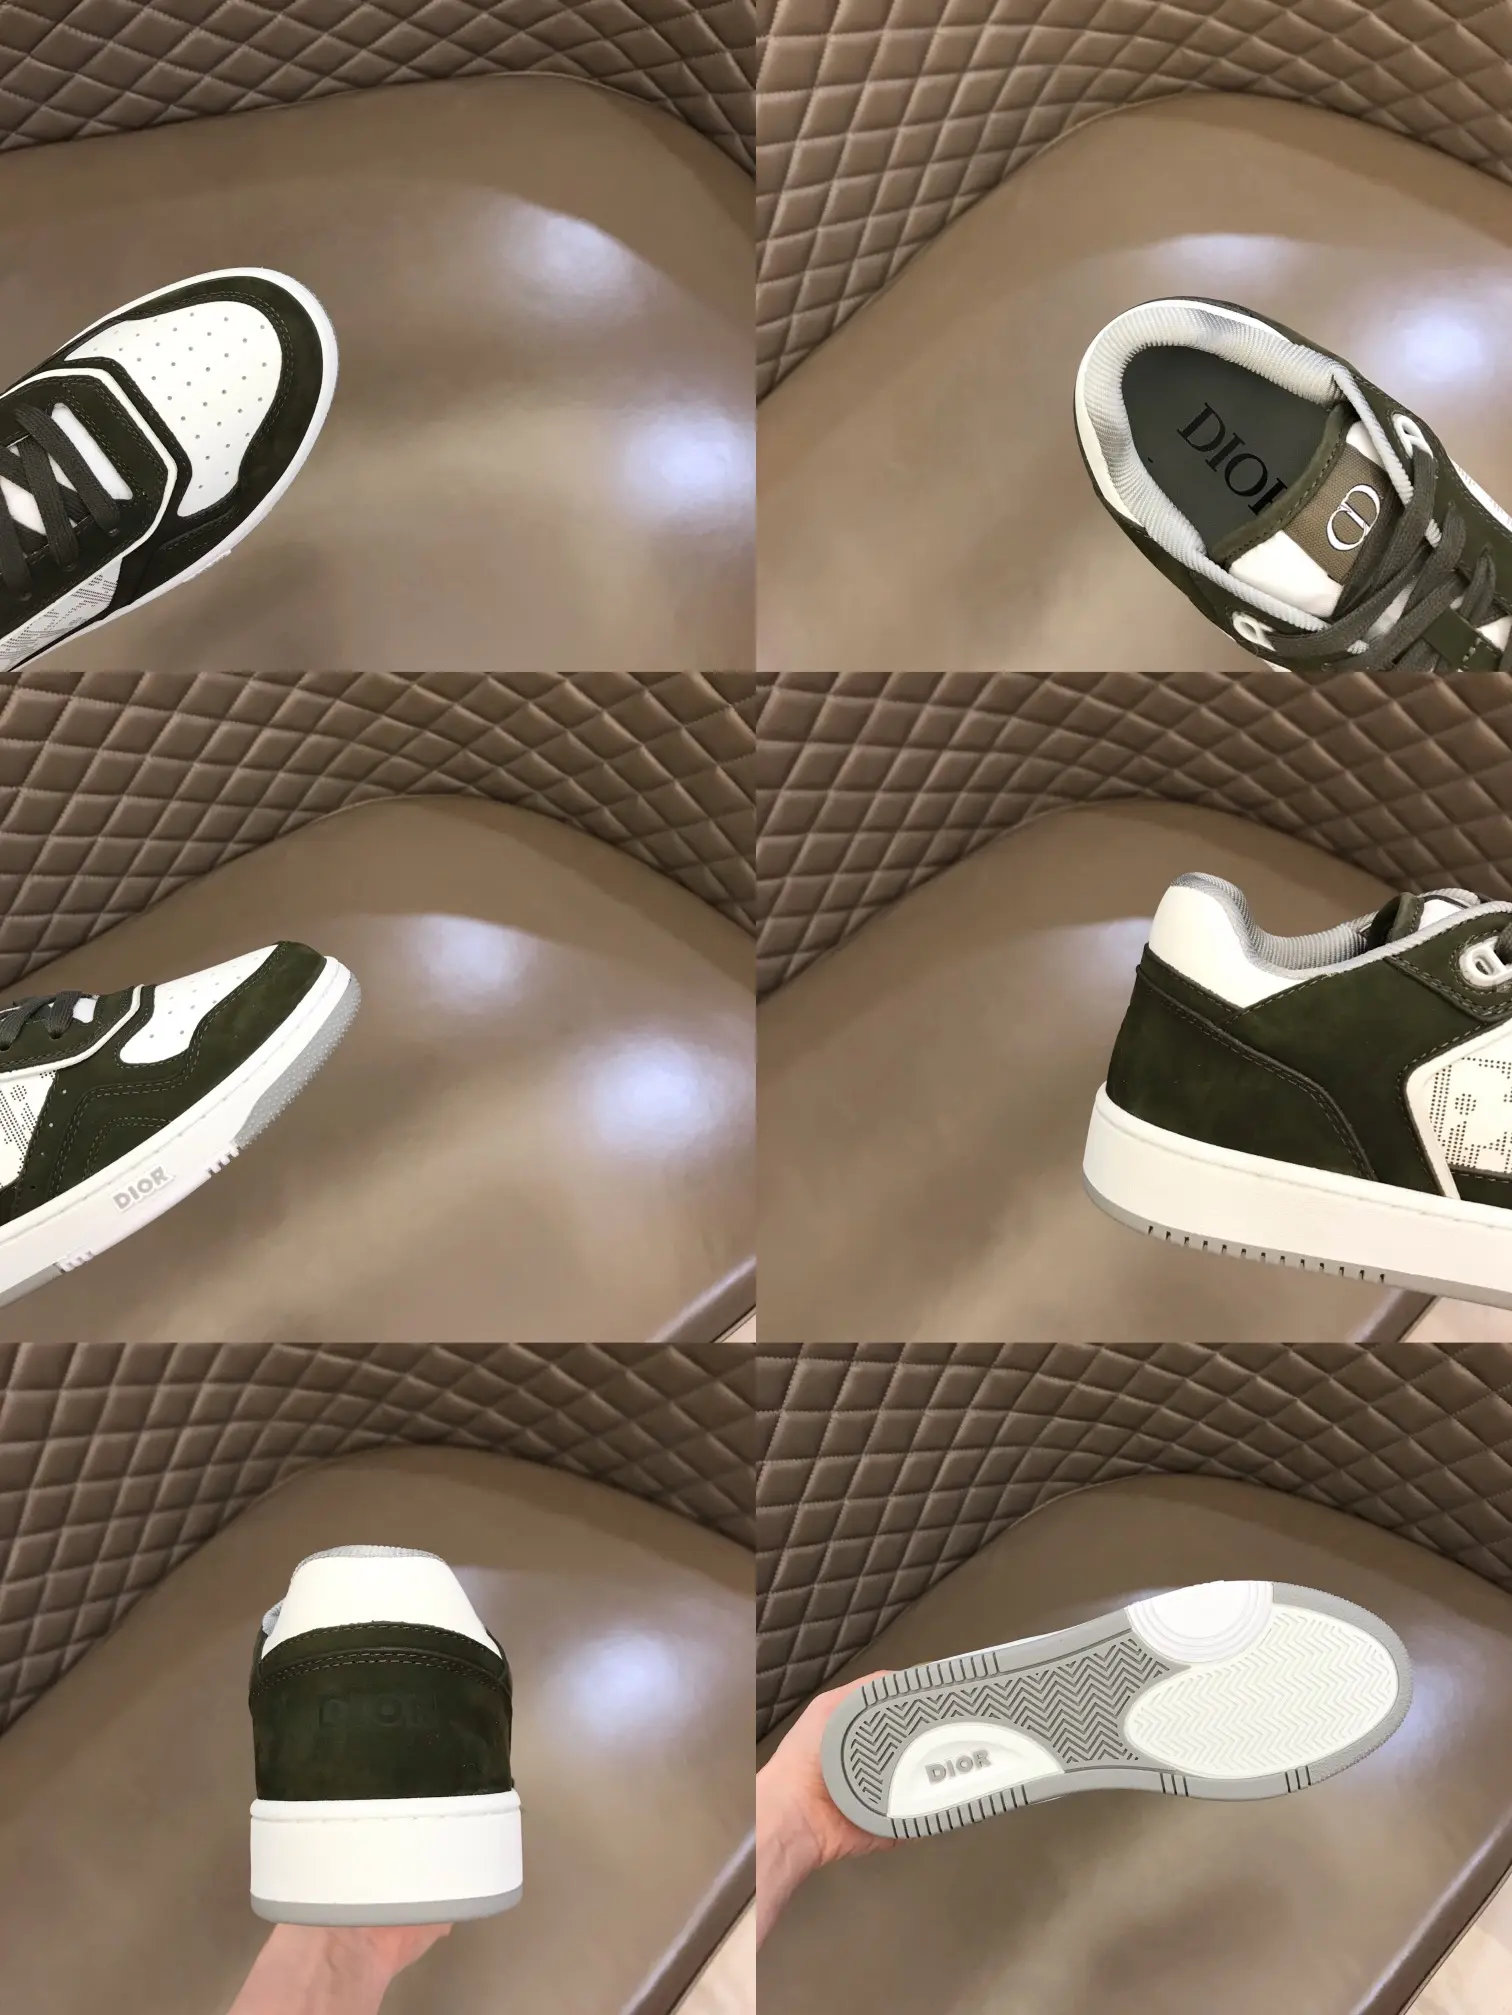 DIOR 2022 new B27 low sneakers  TS23079